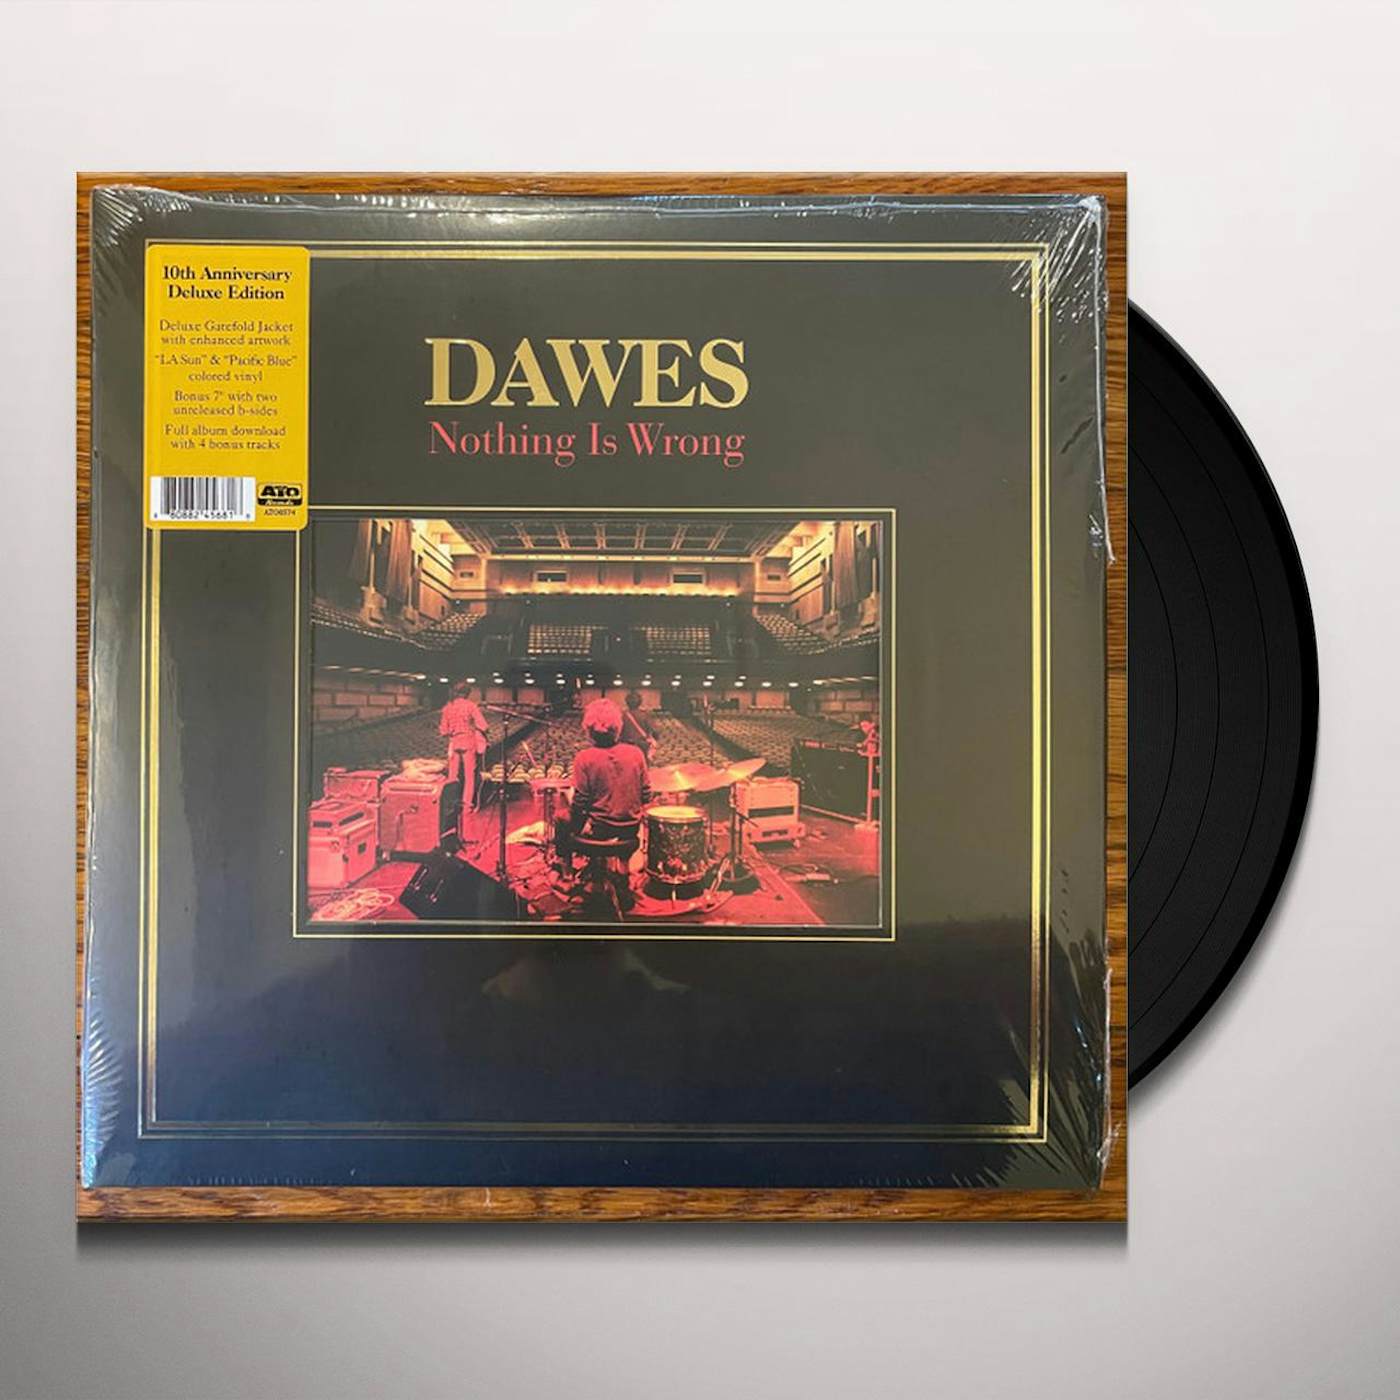 Dawes NOTHING IS WRONG (10TH ANNIVERSARY DELUXE EDITION/ORANGE & BLUE VINYL) Vinyl Record